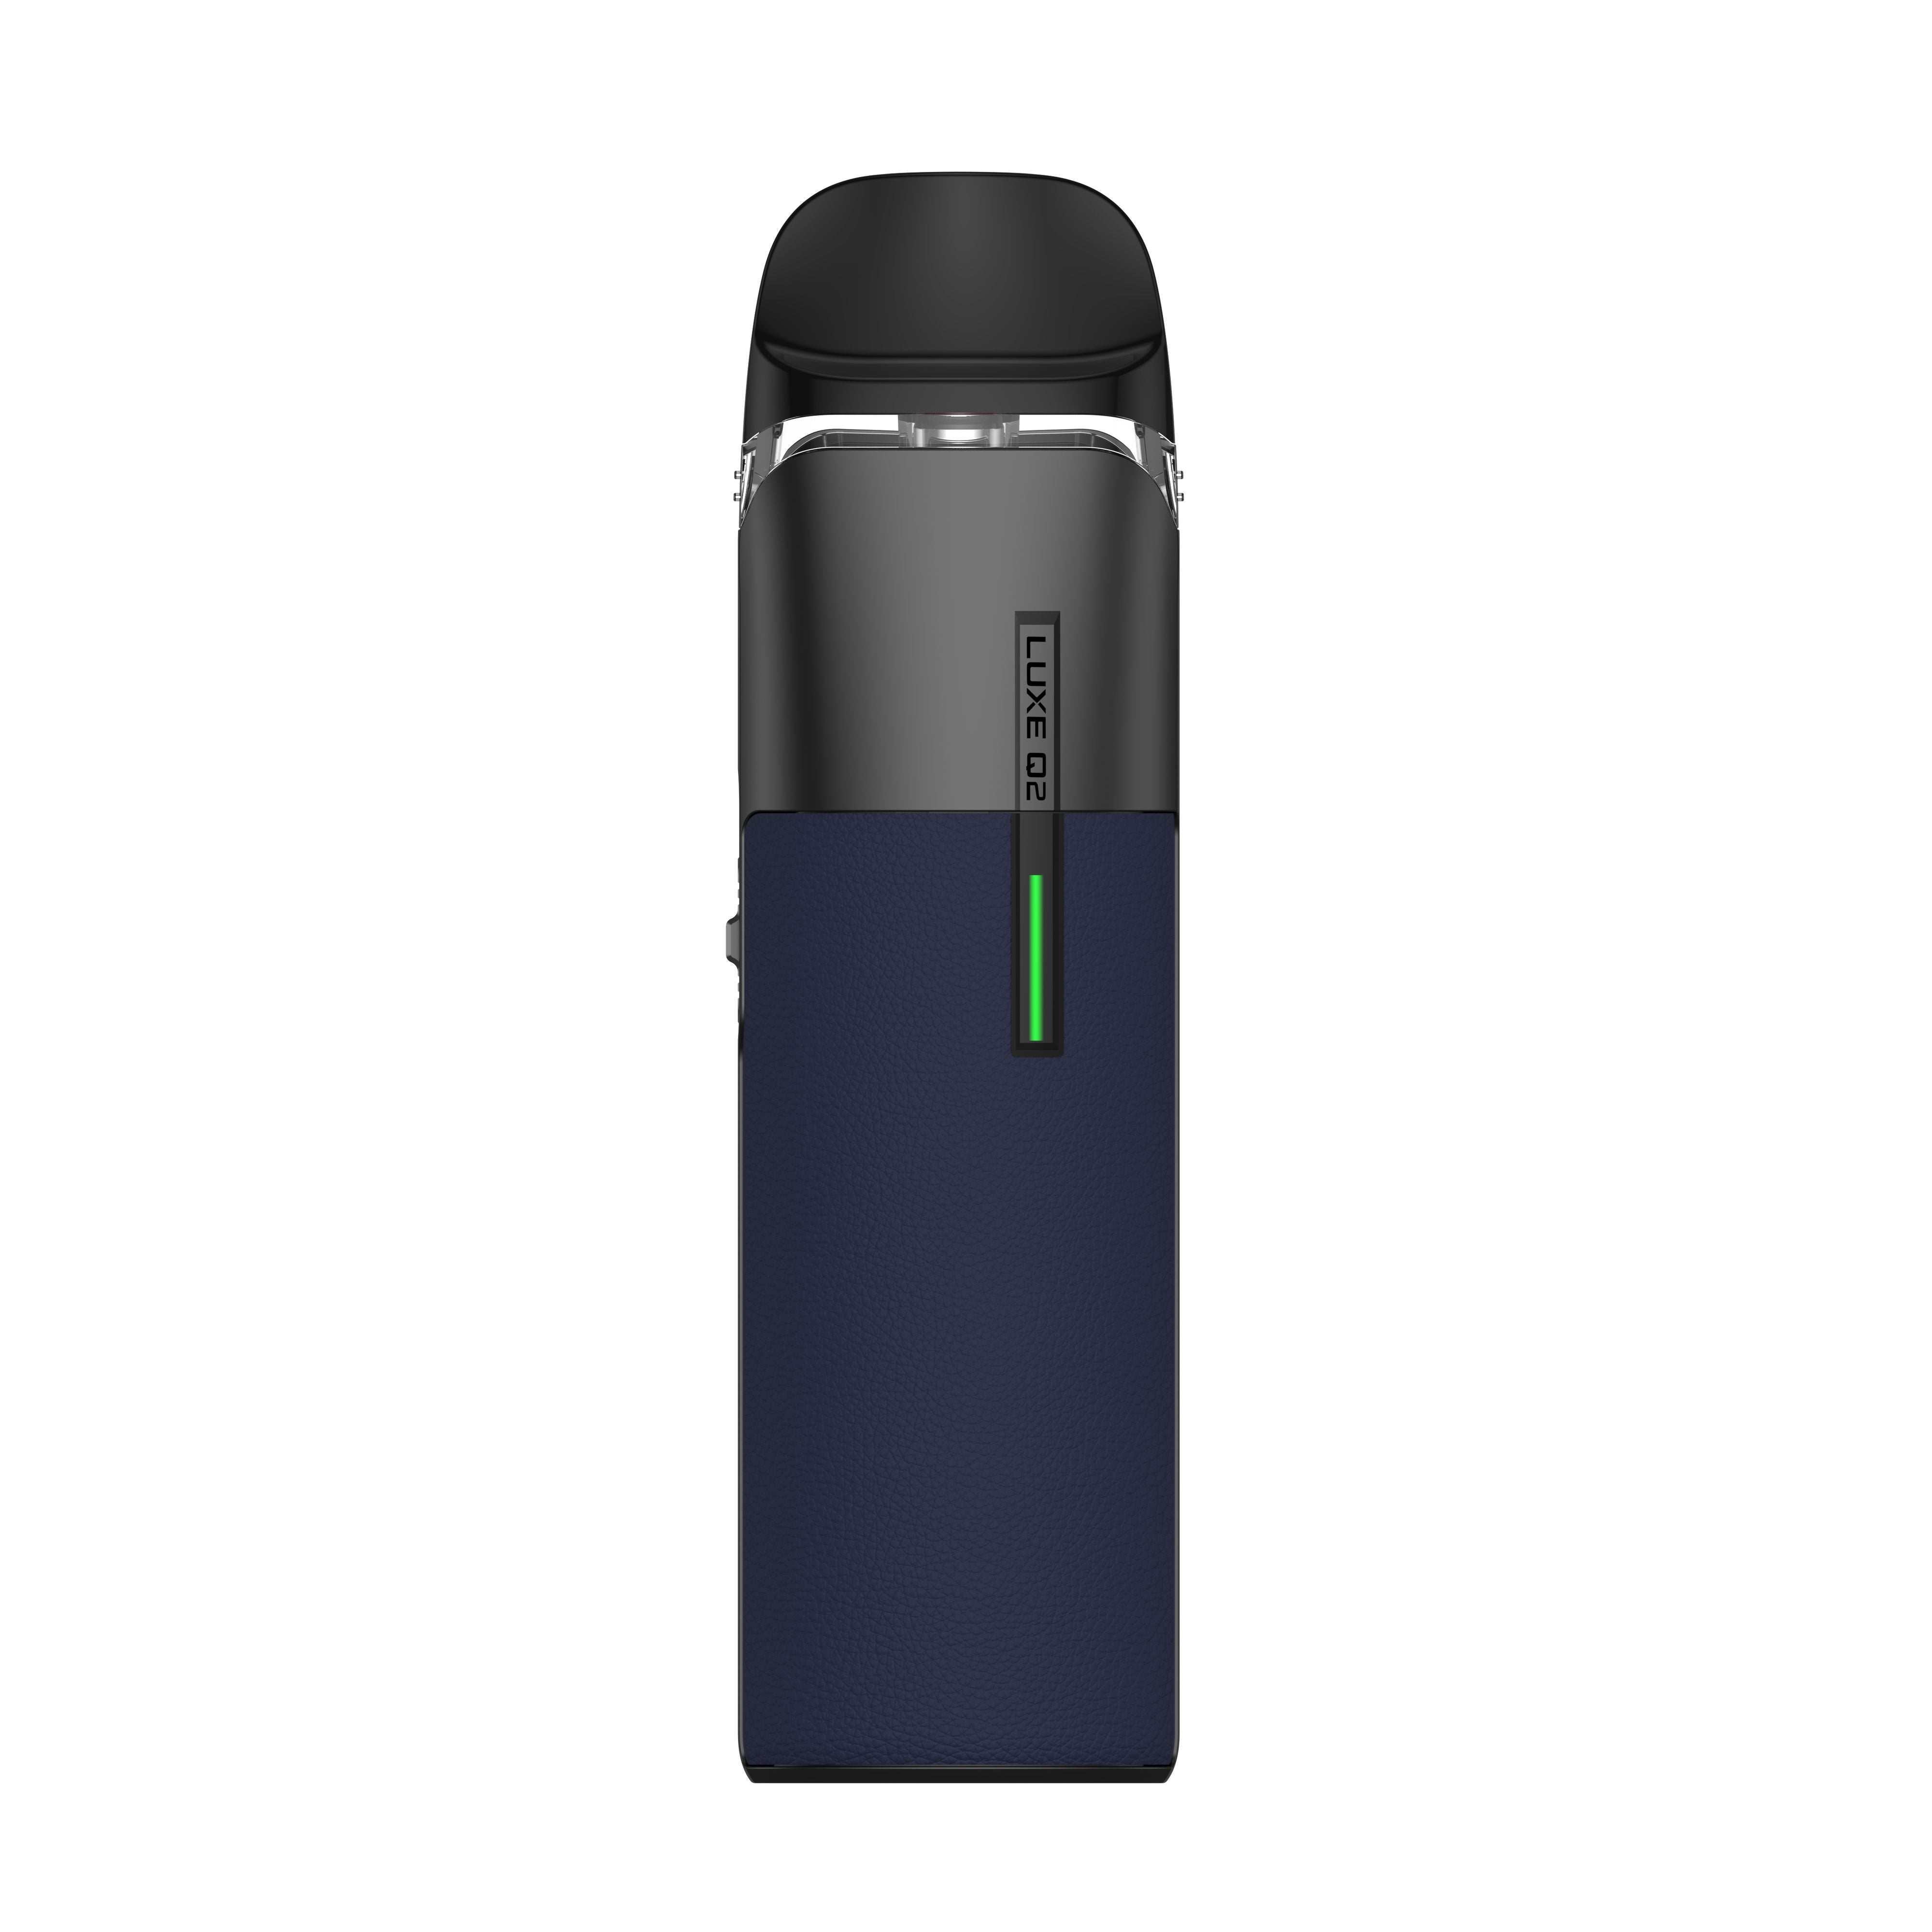 Luxe Q2 Pod Kit by Vaporesso.-Supergood.